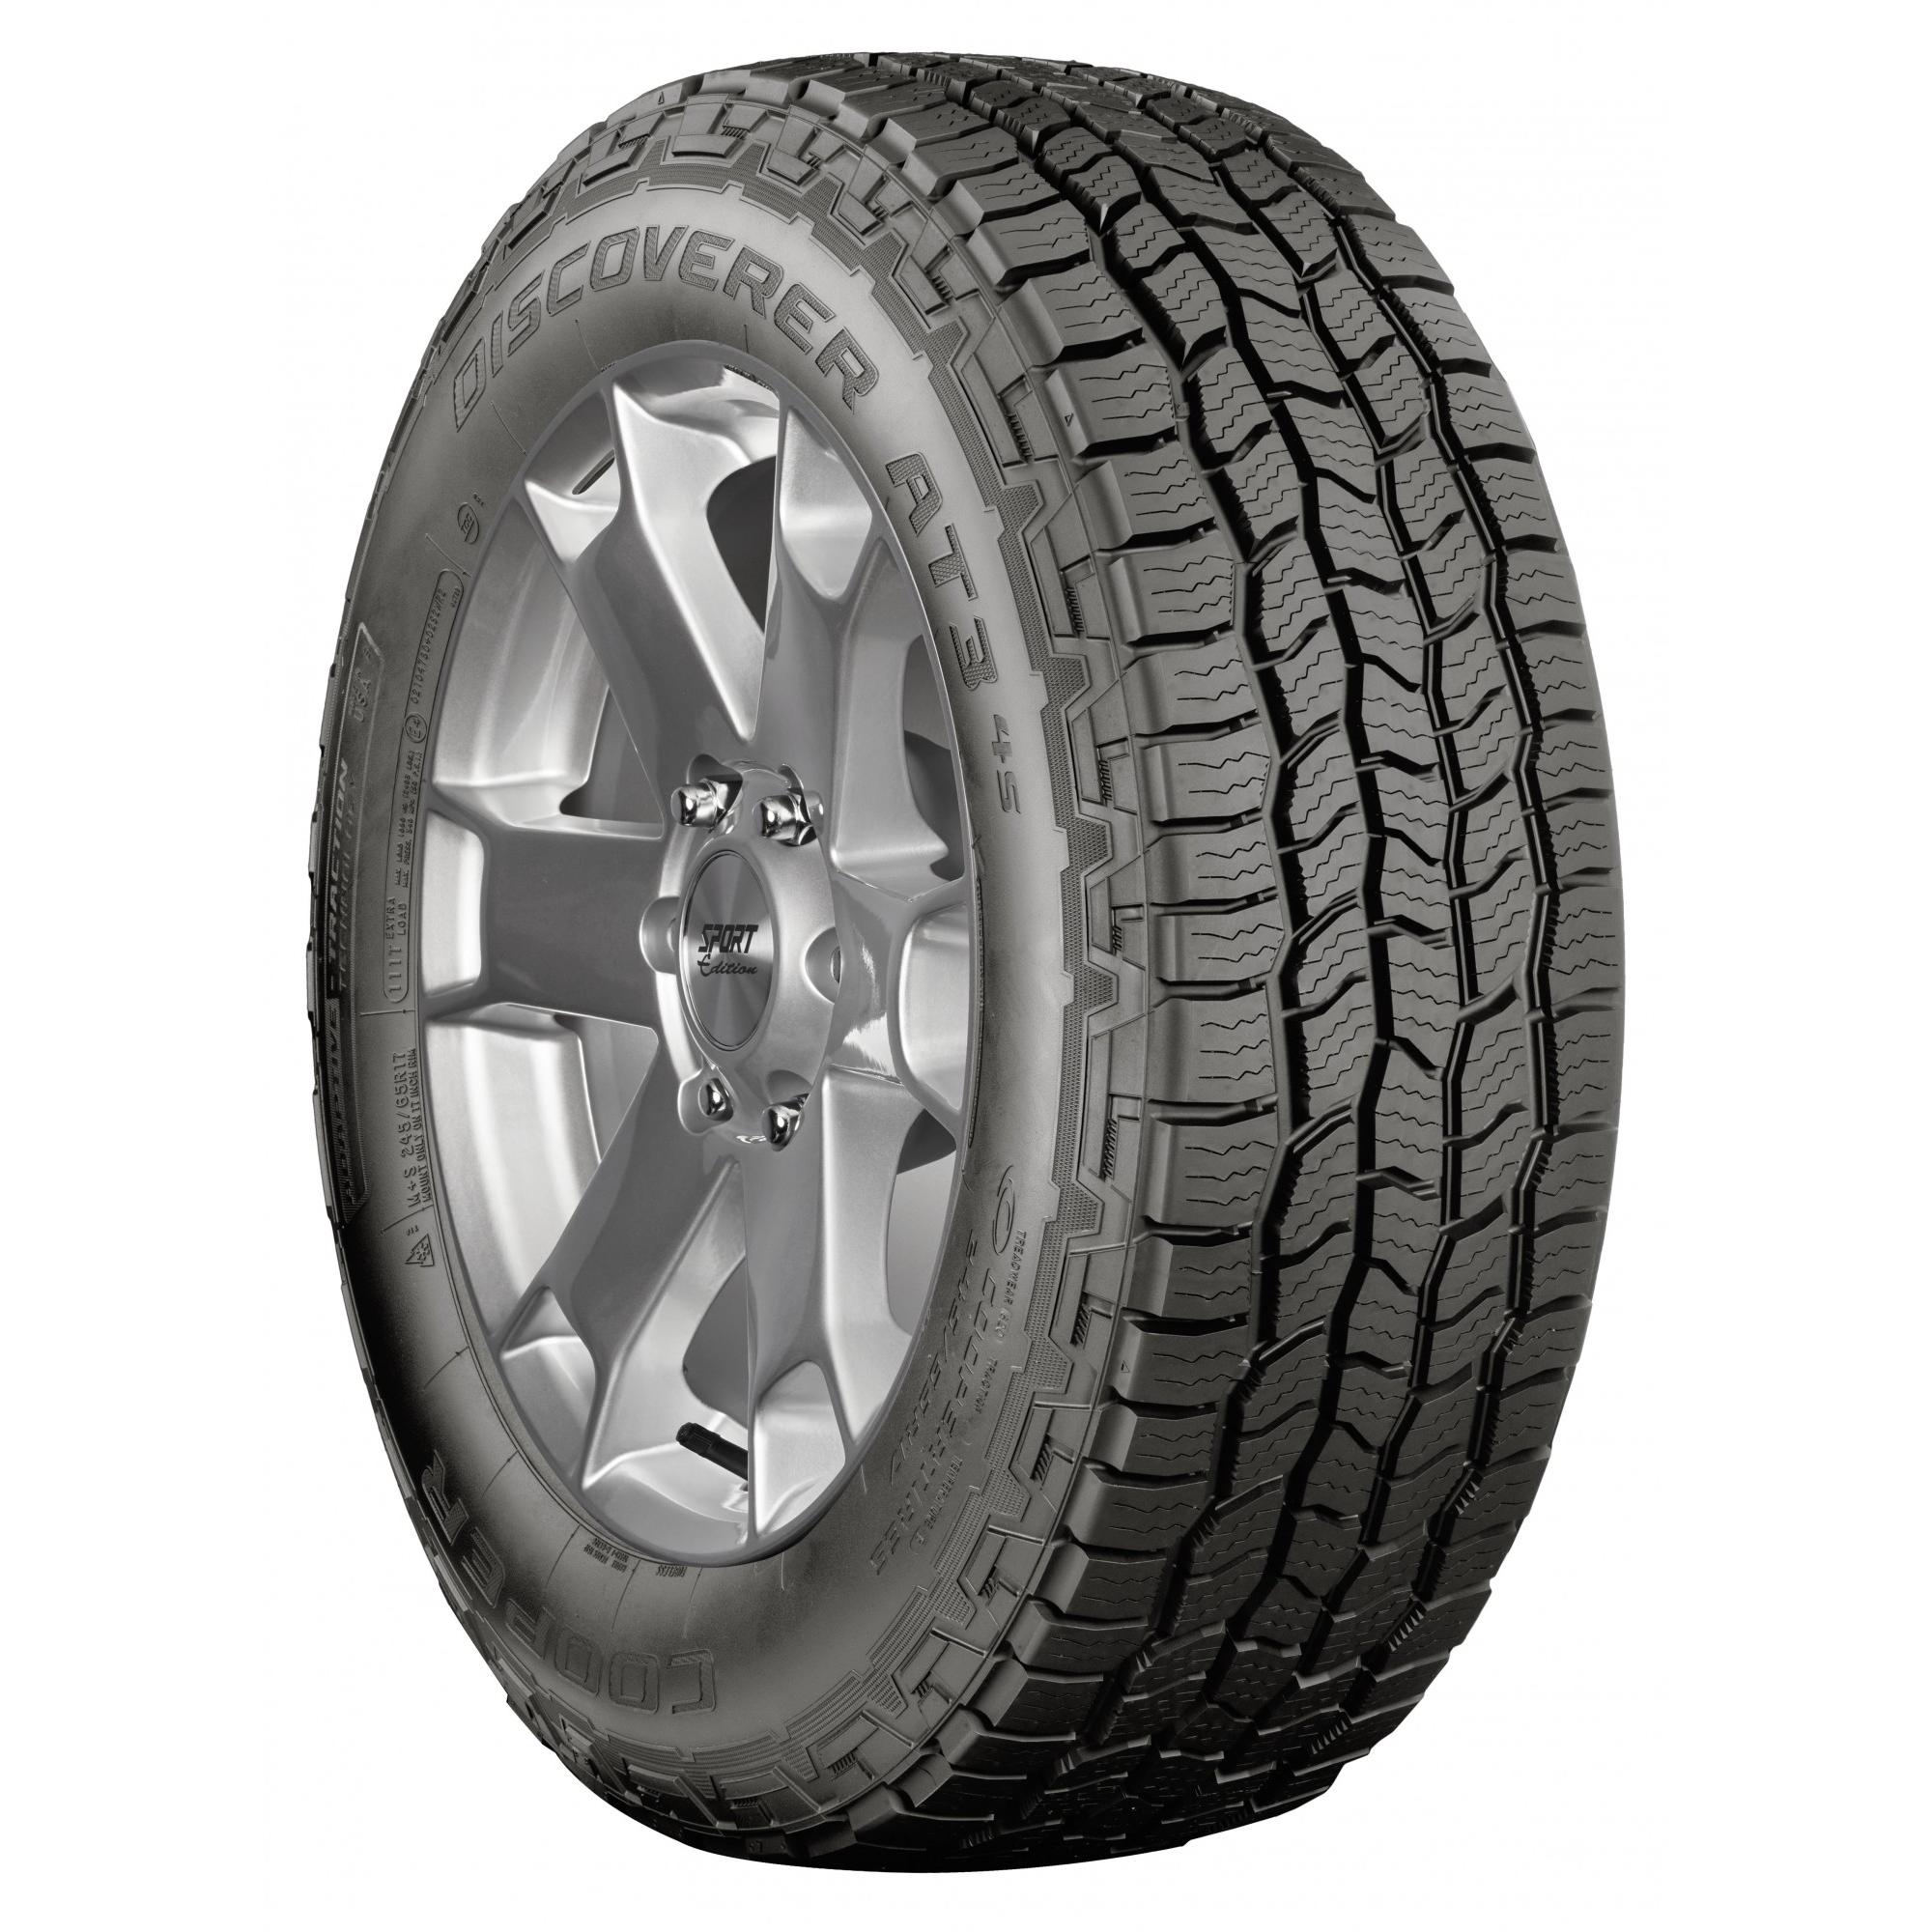 Cooper Discoverer AT3 4S All Season 215 70R16 100T Tire Walmart 